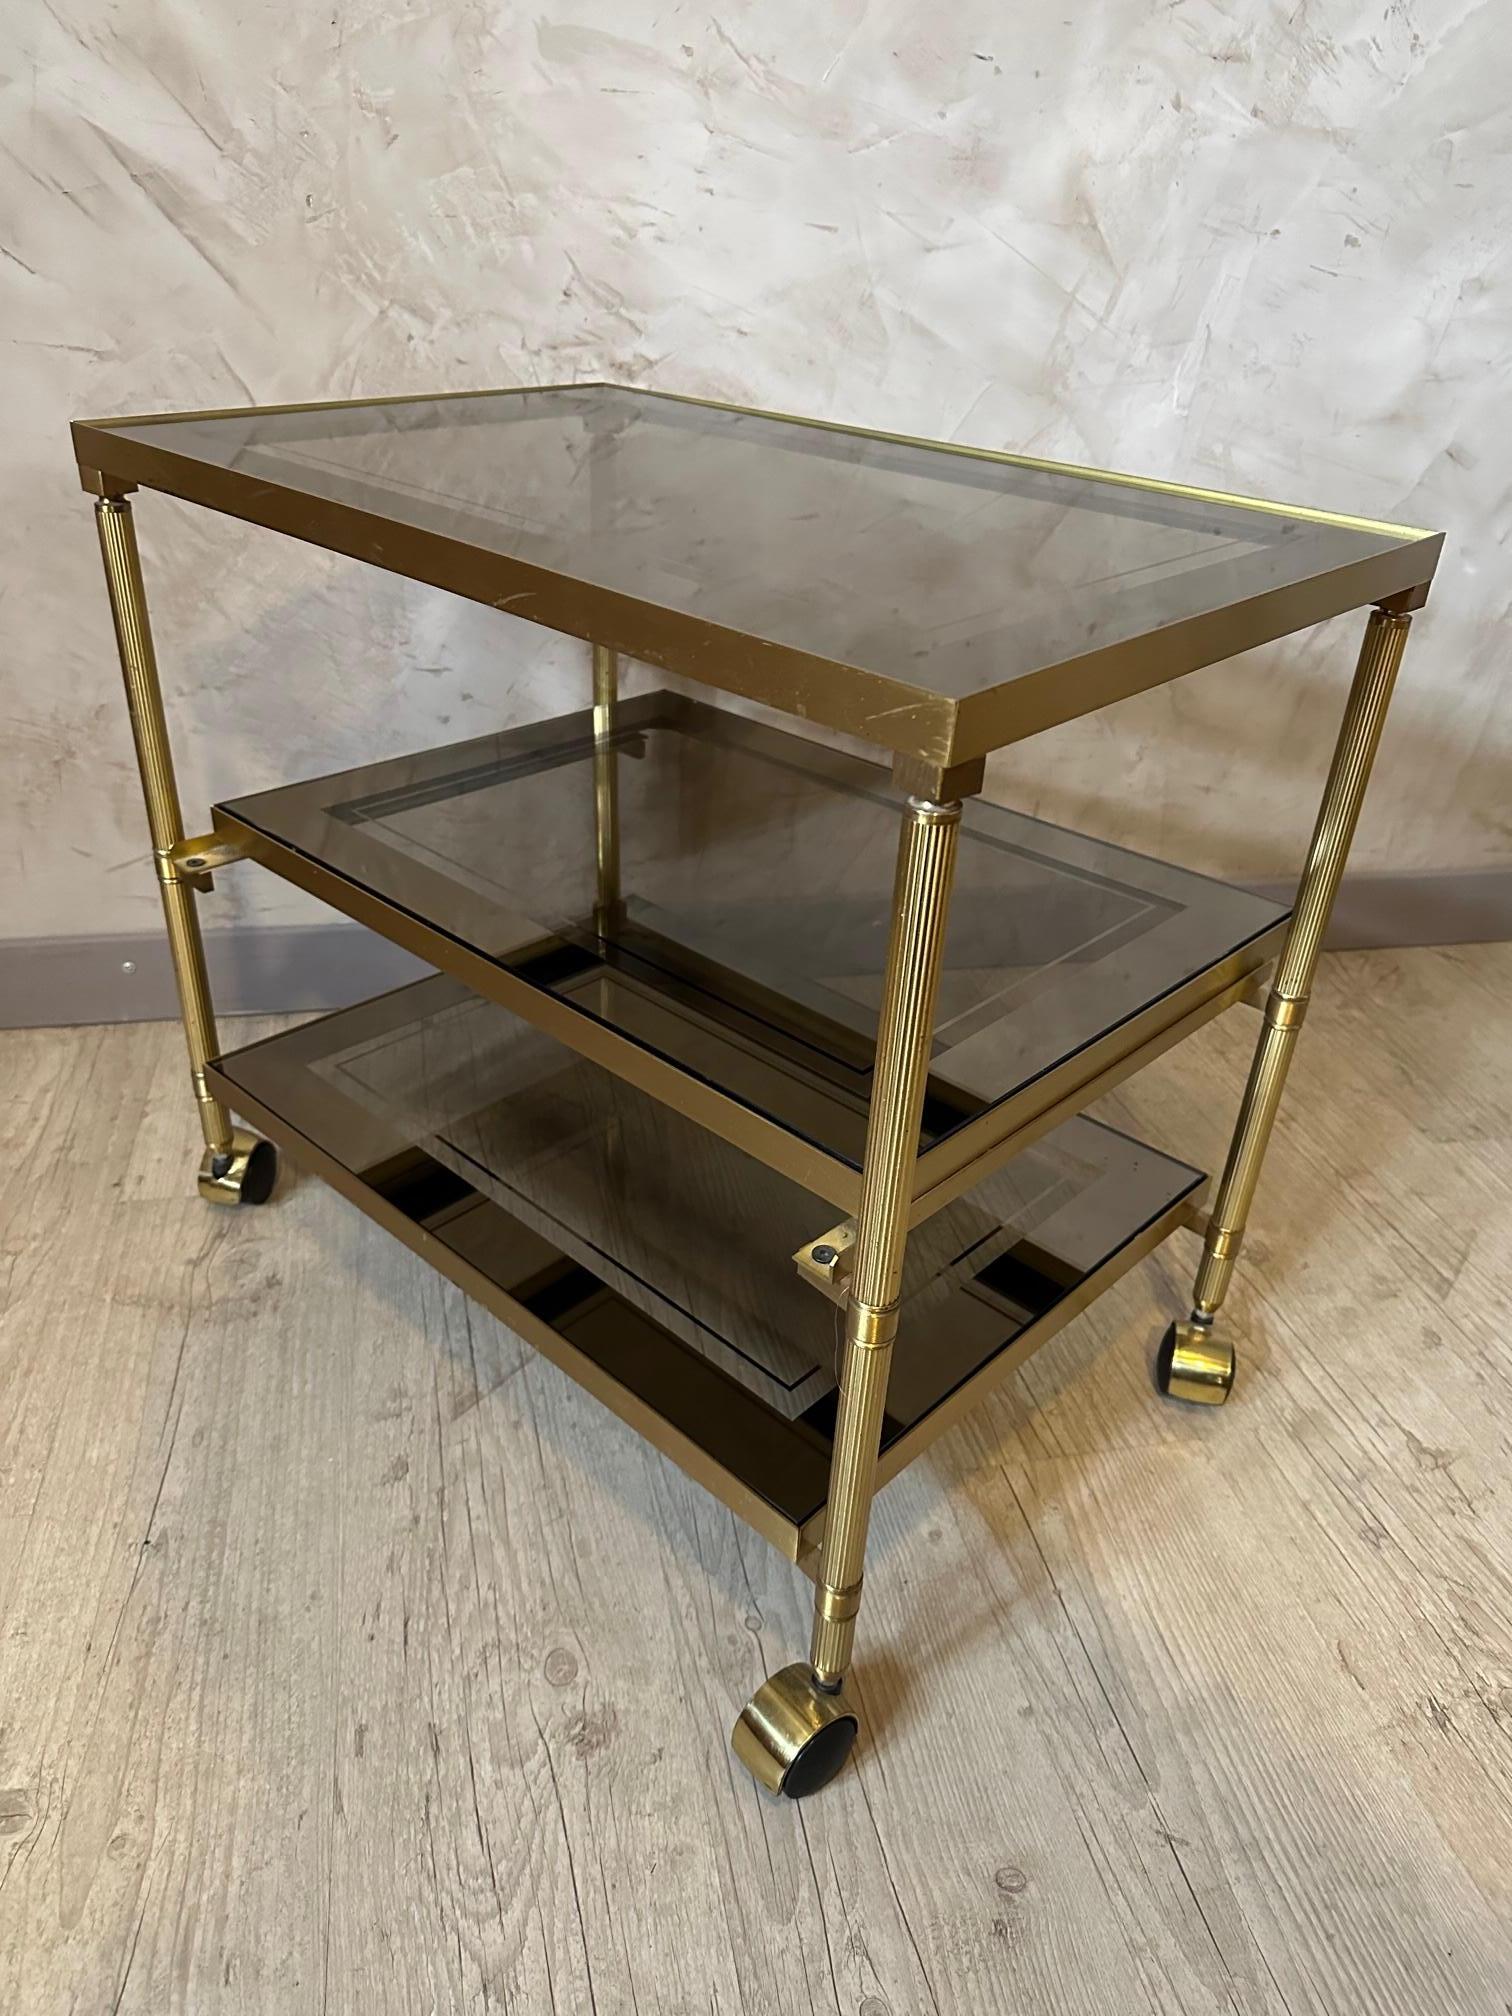 20th century French Brass and Glass Rolling Dessert Table, 1970s For Sale 4